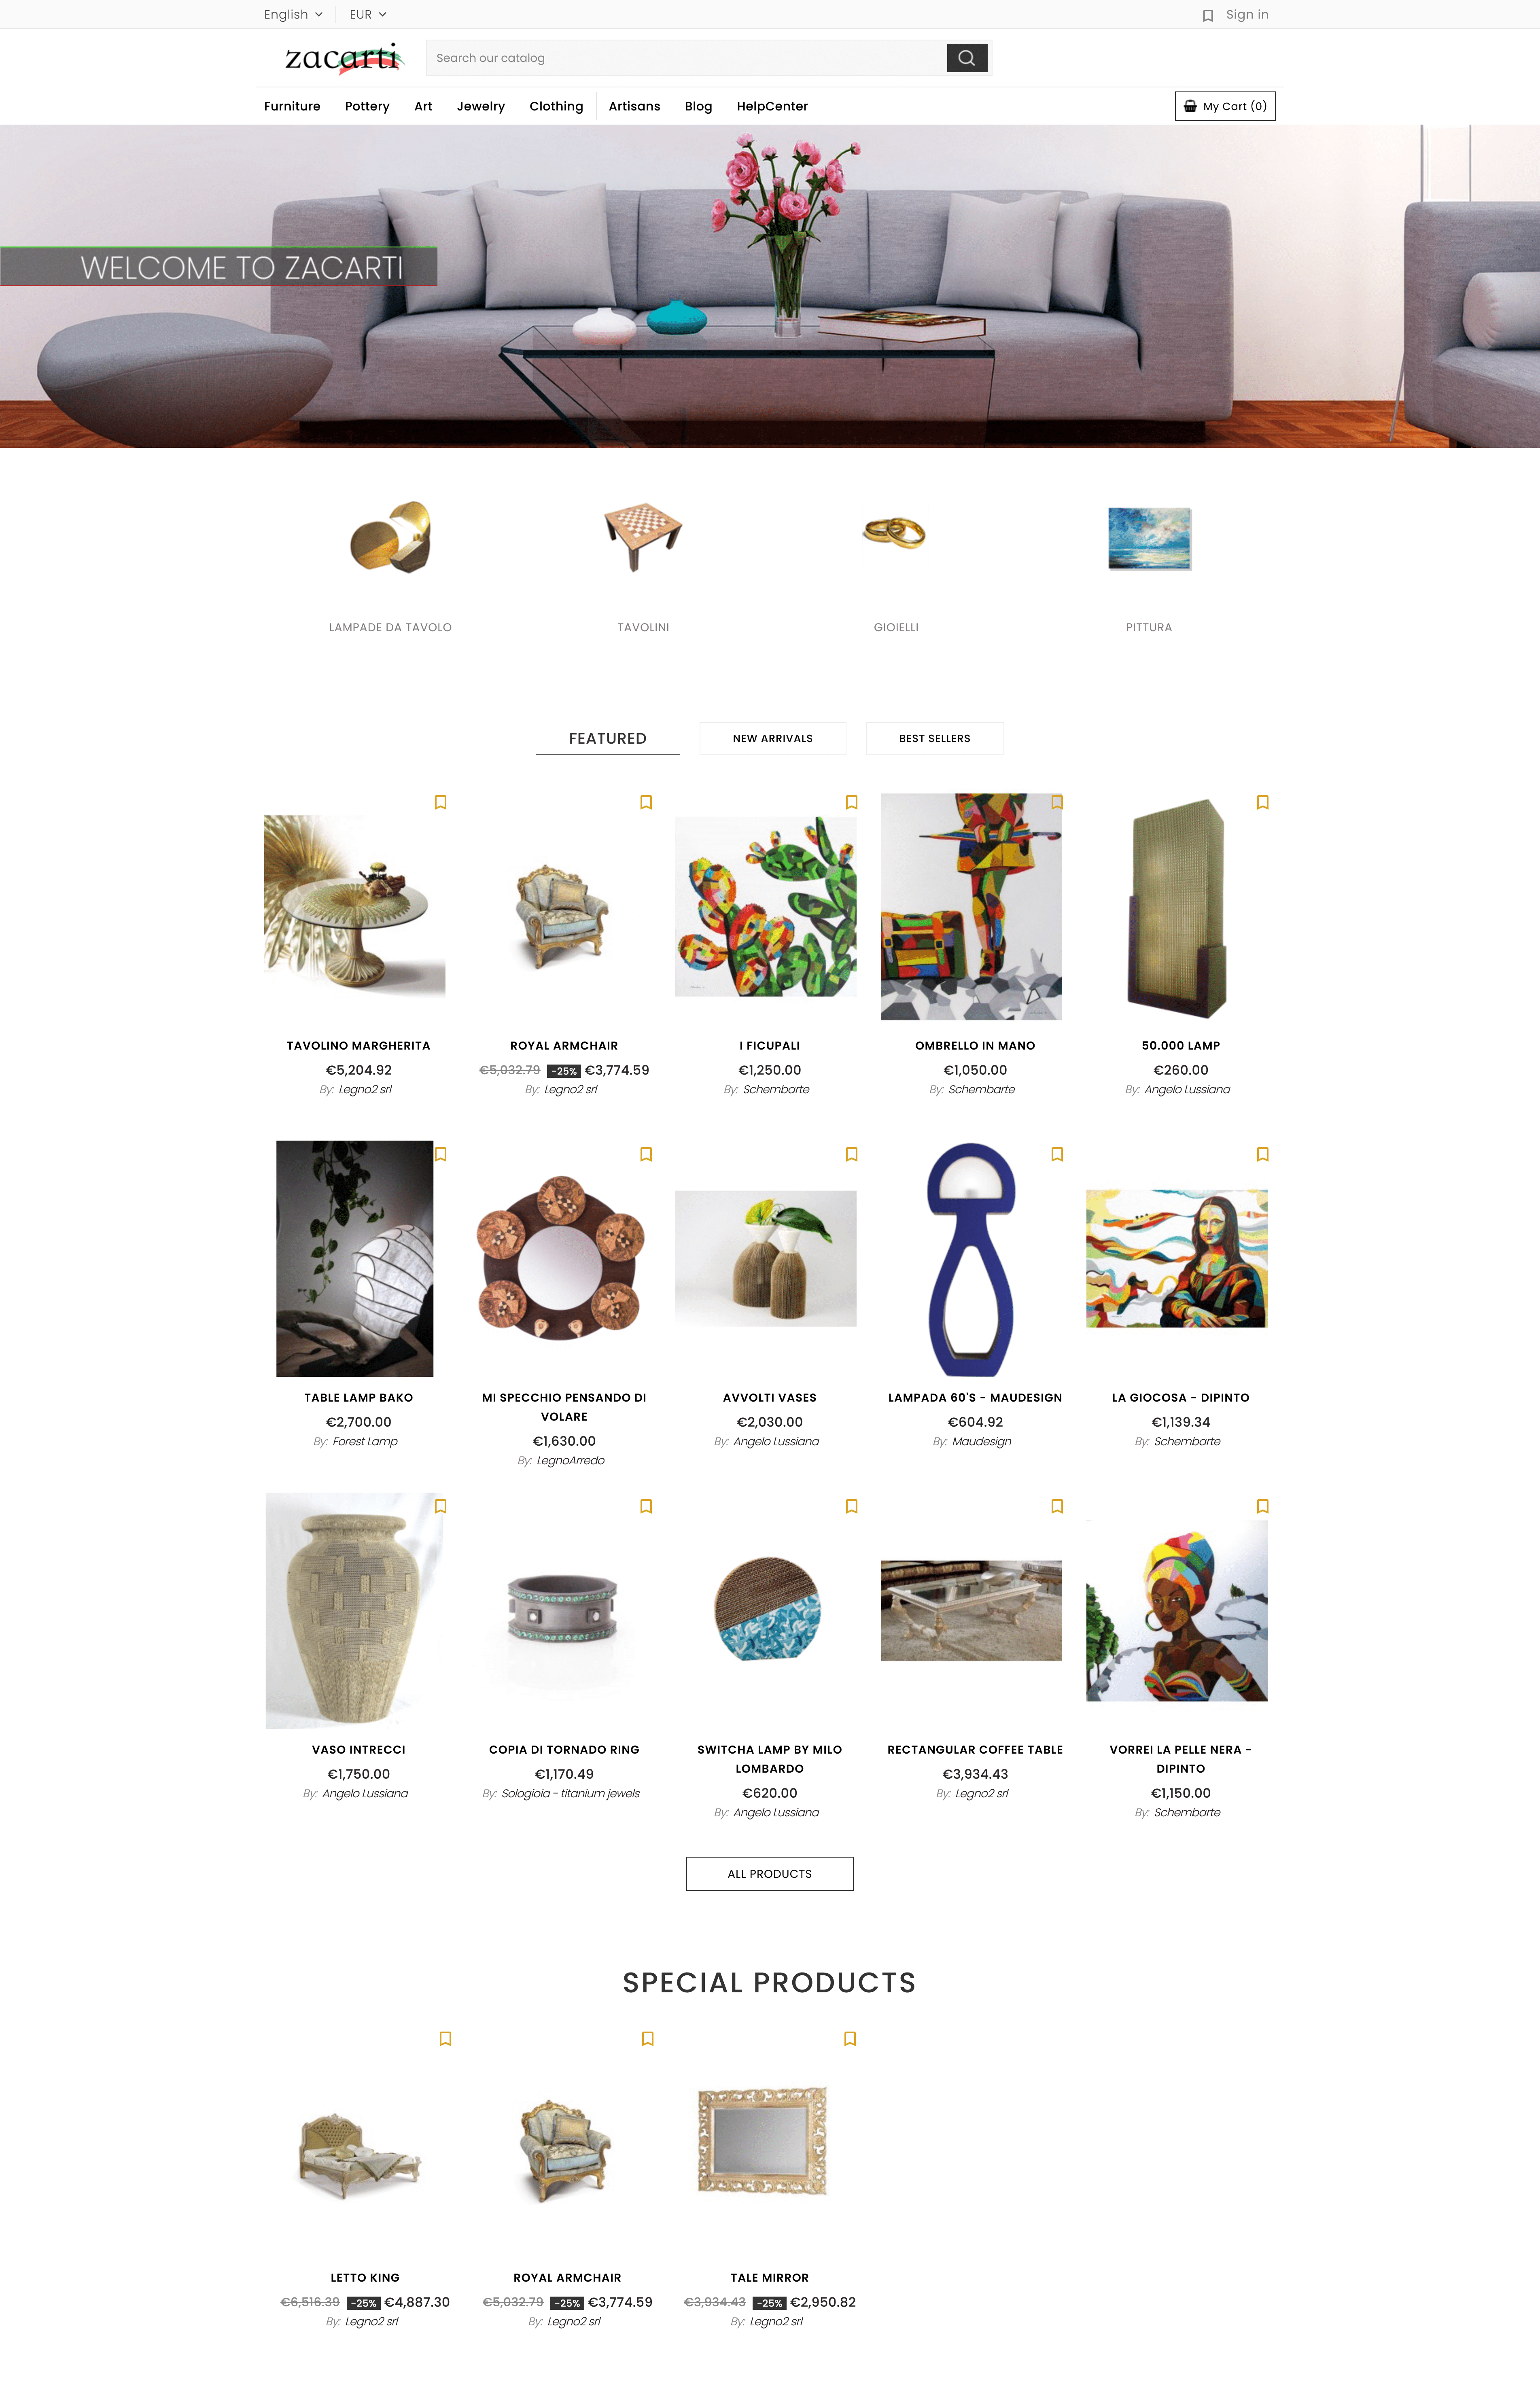 A screenshot showcasing the successful implementation of streamlined product listings and inventory management practices on the Zacarti.com marketplace